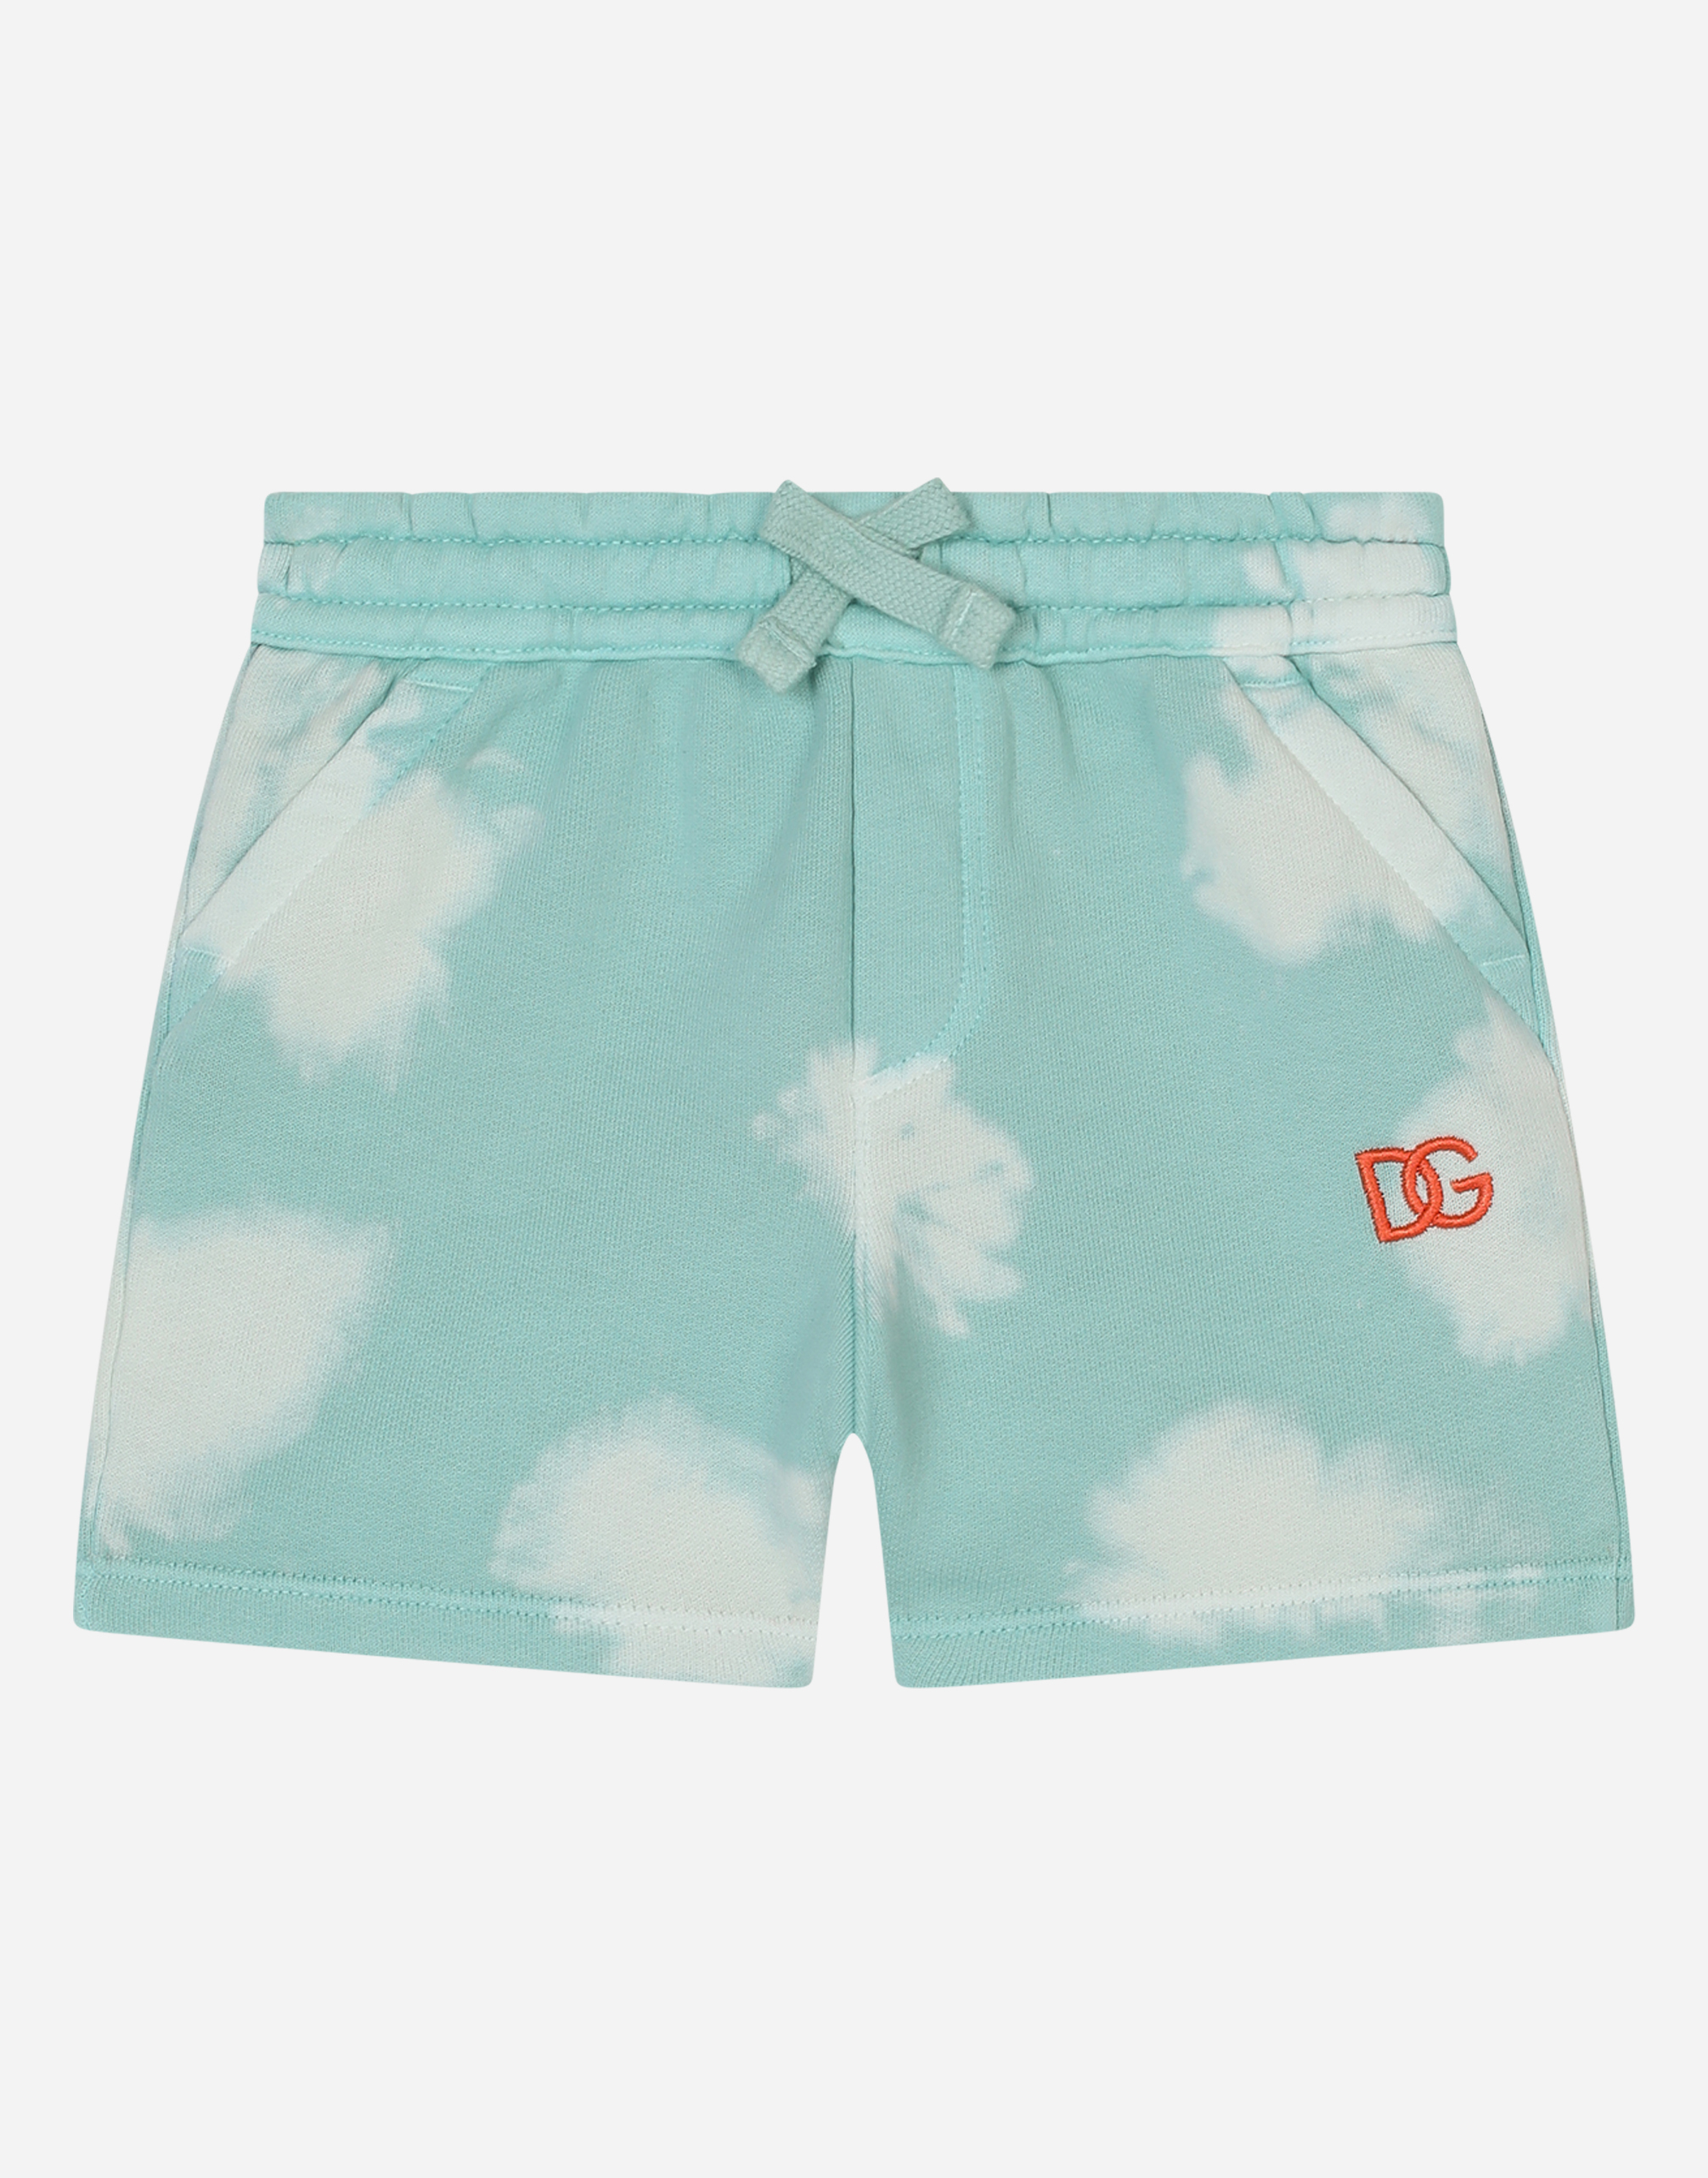 DOLCE & GABBANA JERSEY JOGGING SHORTS WITH CLOUD PRINT